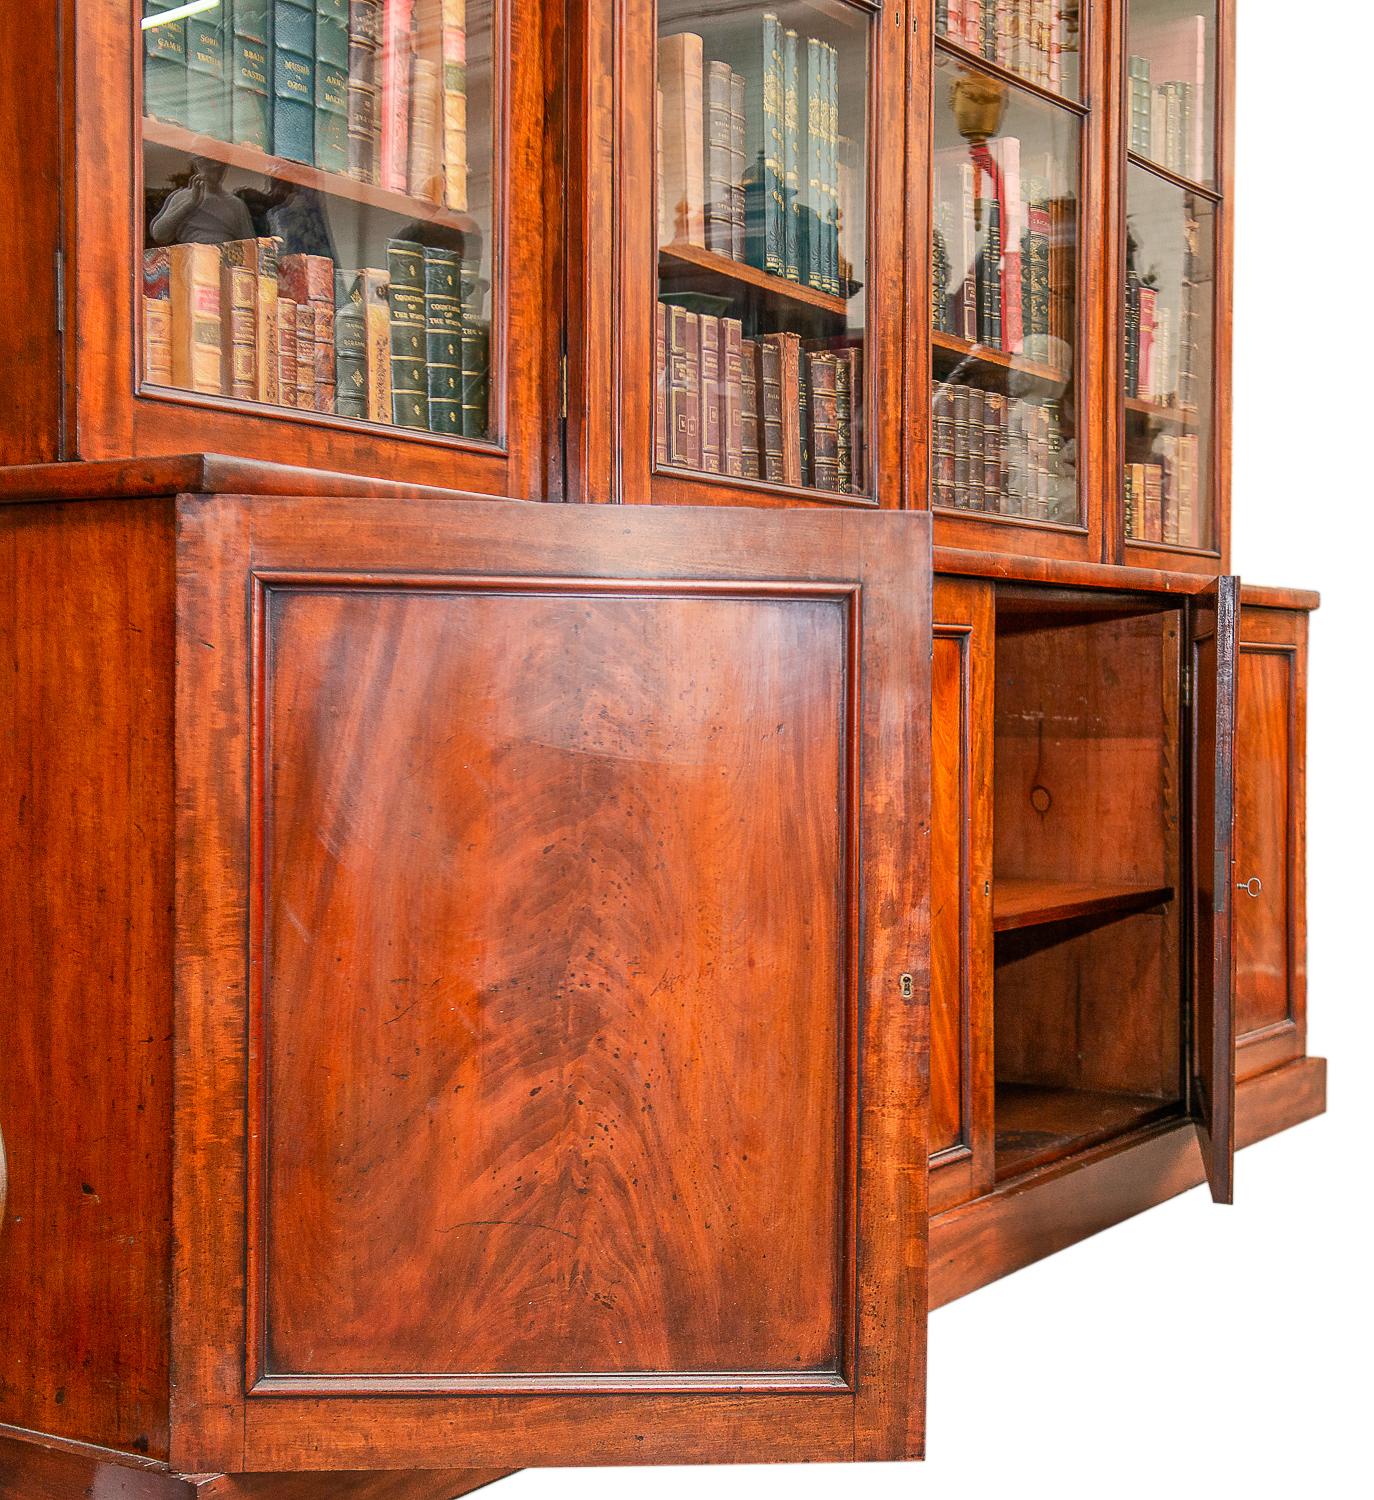 A very good quality Regency period mahogany breakfronted library bookcase, having four glazed doors above with adjustable shelves within. Inset molded panels with roundels above. Four paneled doors beneath with figured mahogany veneers and raised on